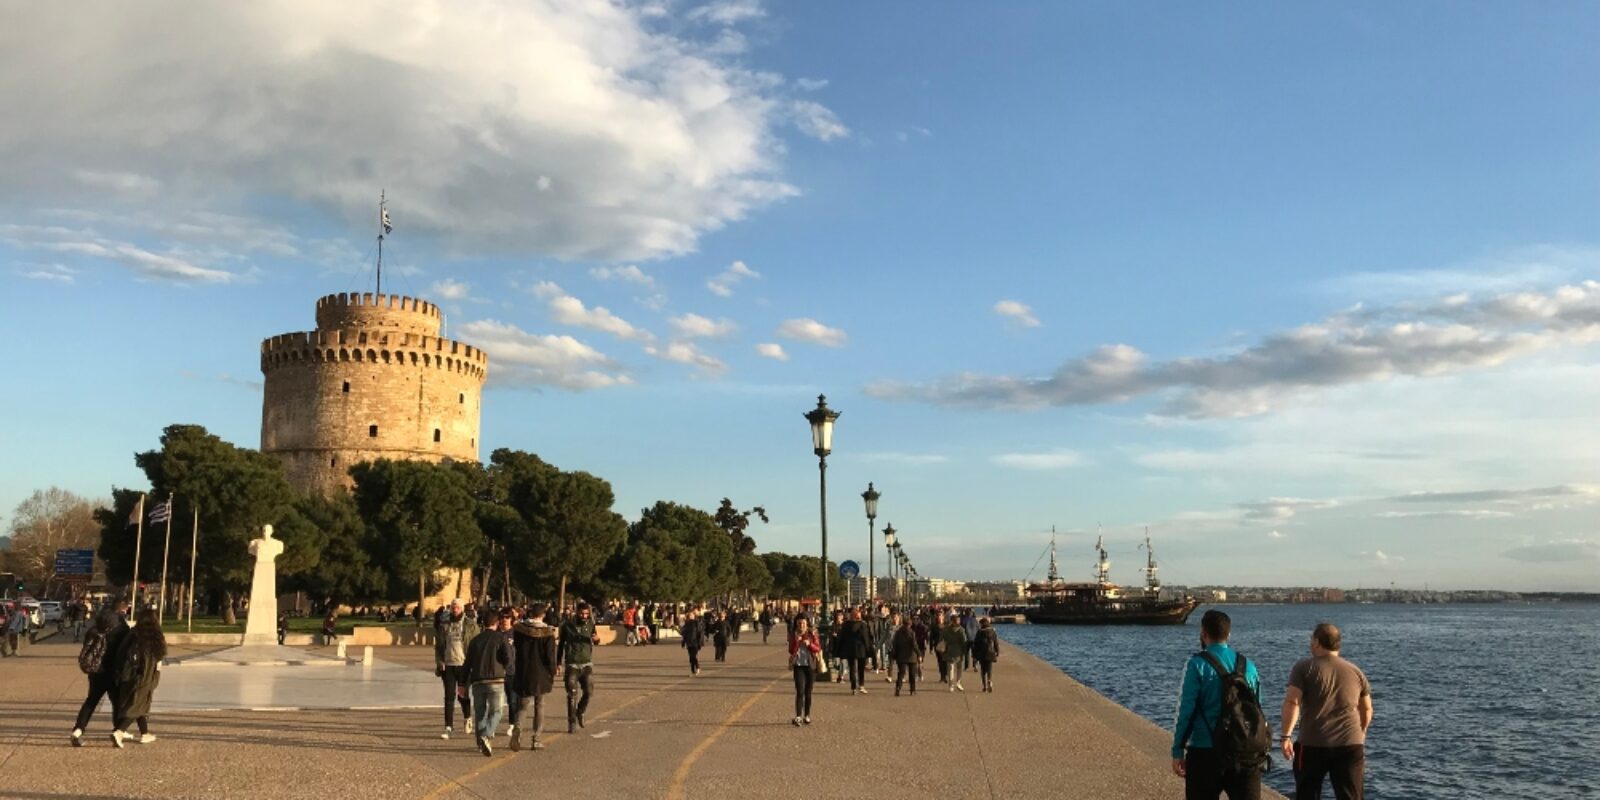 An image of tourists visiting the White Tower for an article about "senior trip to Thessaloniki."